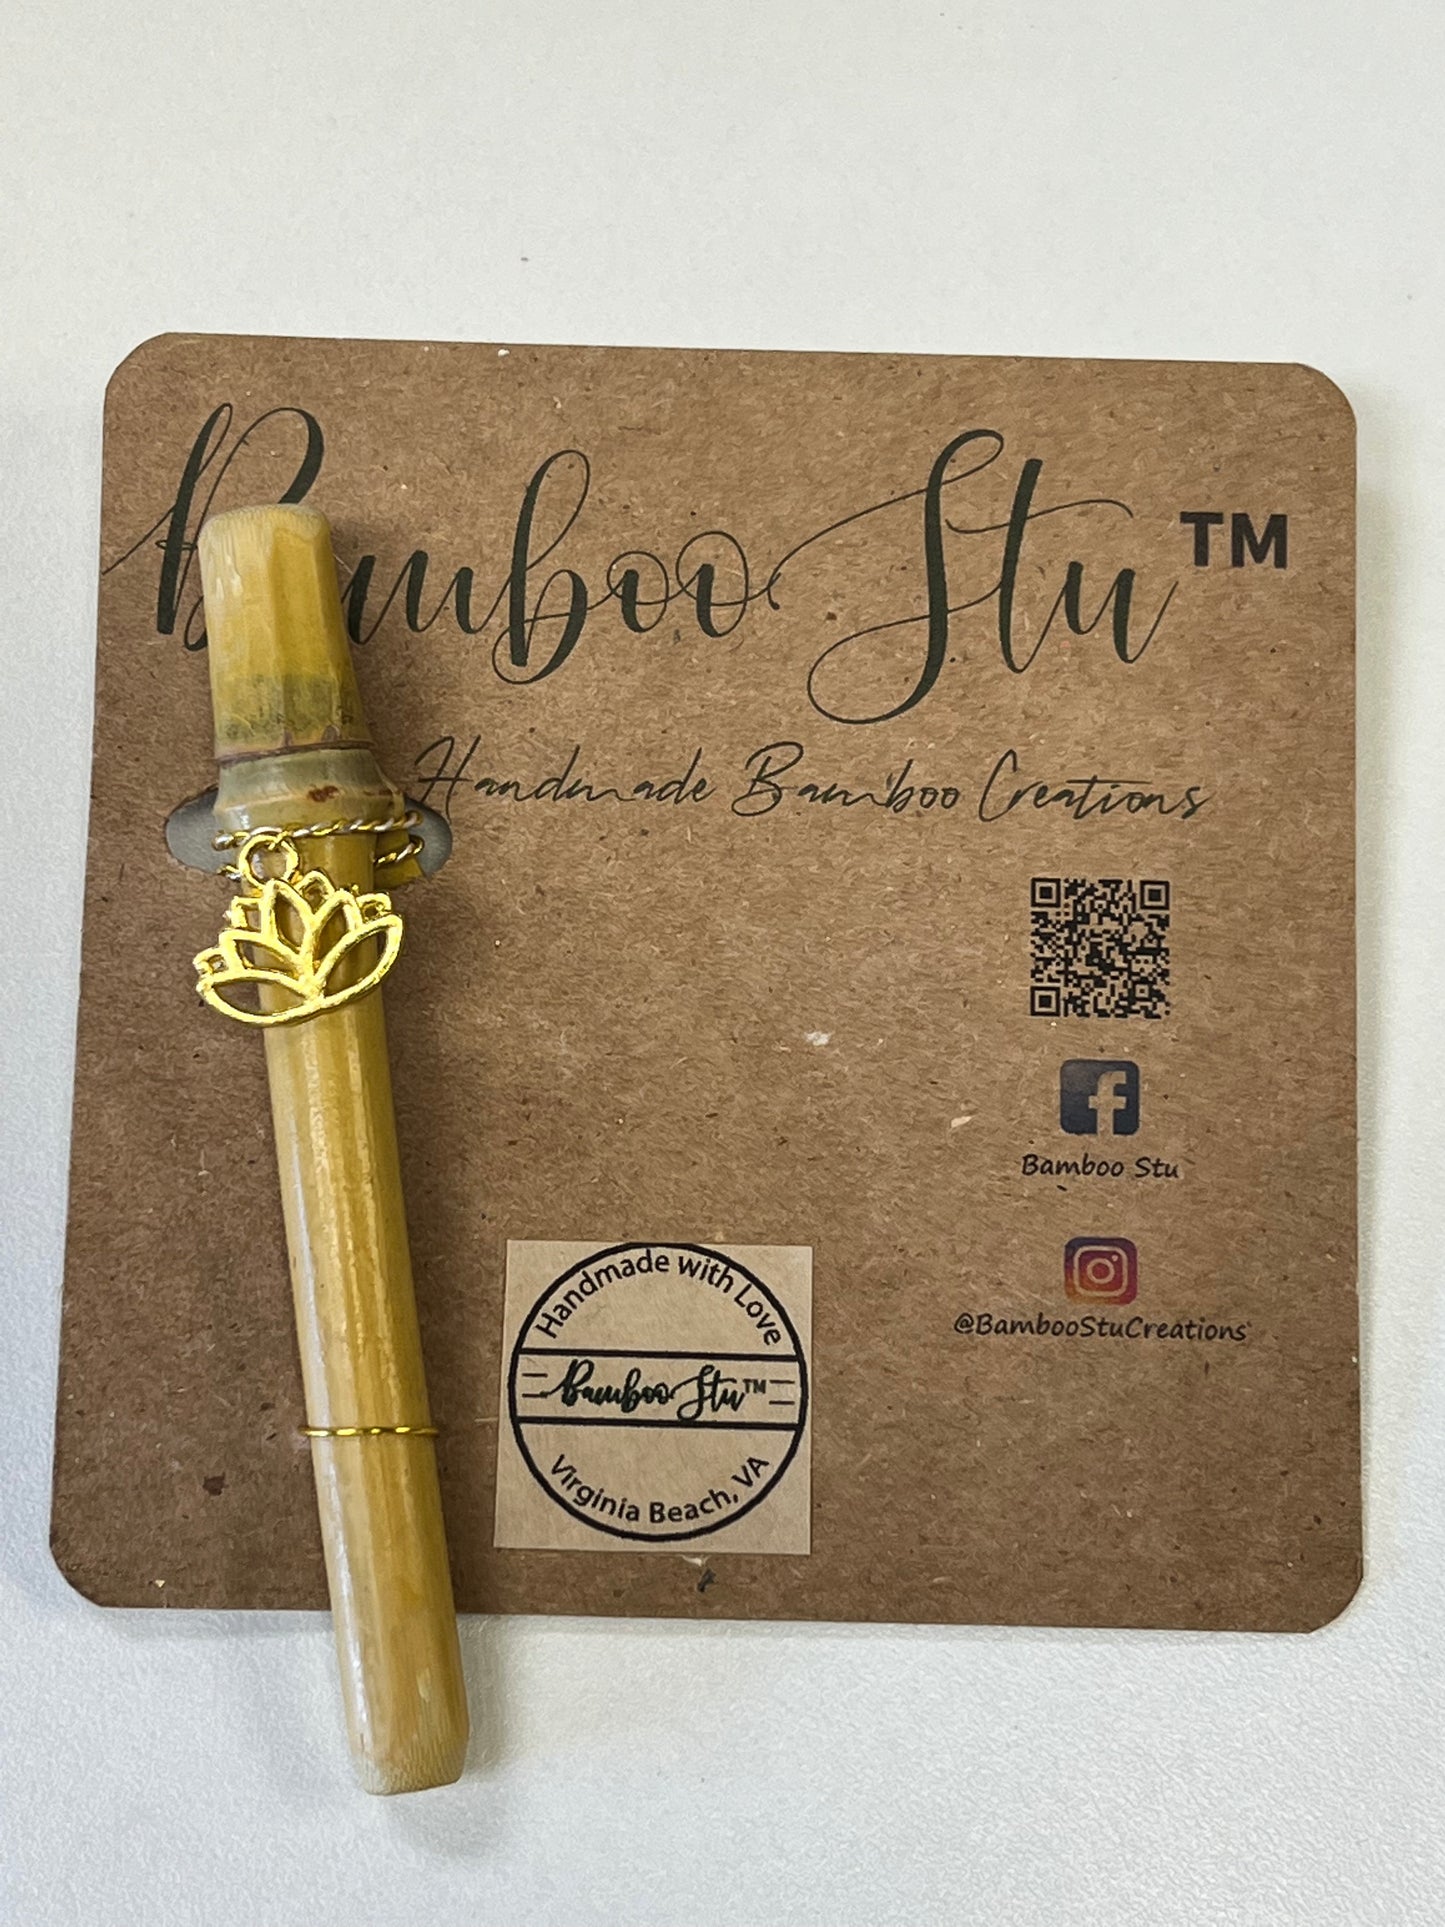 Stuletto Classic Bamboo Smoke Holder with Built-in Stand yoga smokes yoga studio, delivery, delivery near me, yoga smokes smoke shop, find smoke shop, head shop near me, yoga studio, headshop, head shop, local smoke shop, psl, psl smoke shop, smoke shop, smokeshop, yoga, yoga studio, dispensary, local dispensary, smokeshop near me, port saint lucie, florida, port st lucie, lounge, life, highlife, love, stoned, highsociety. Yoga Smokes Lotus Flower